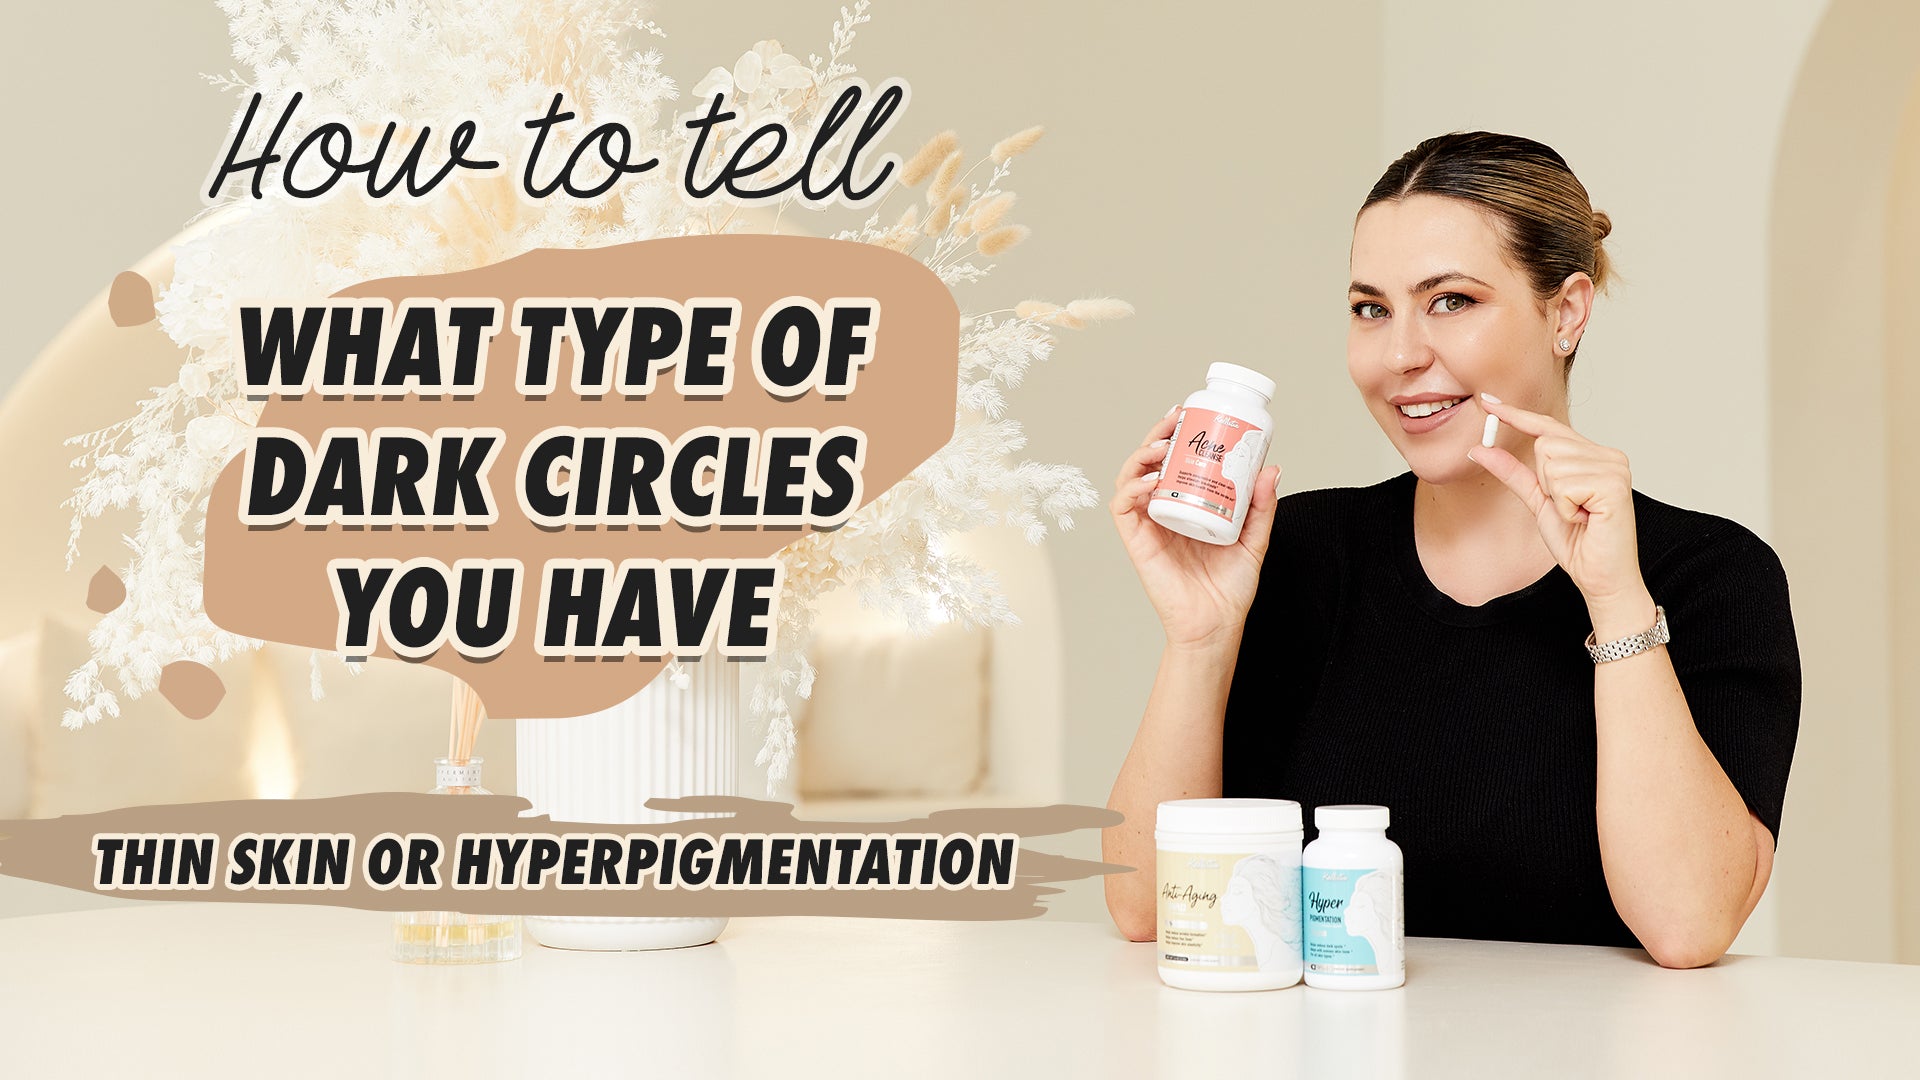 How to tell what type of dark circles you have